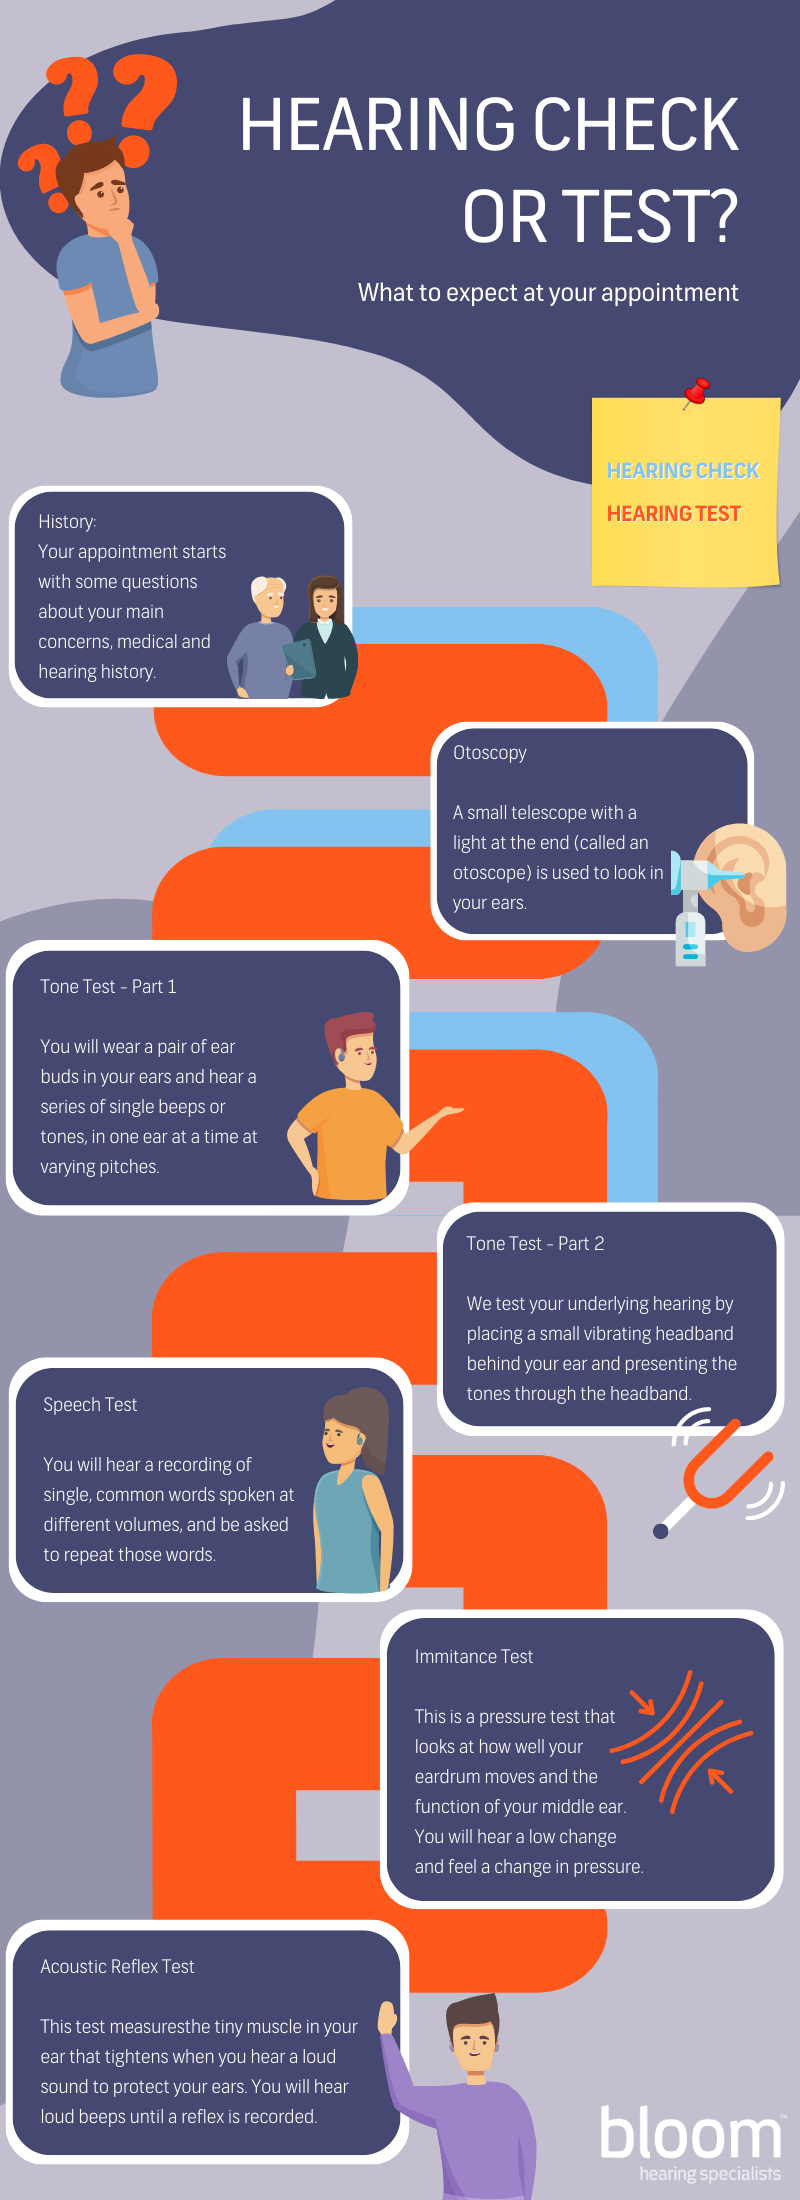 infographic difference between hearing check and hearing test. what to expect during your hearing test appointment